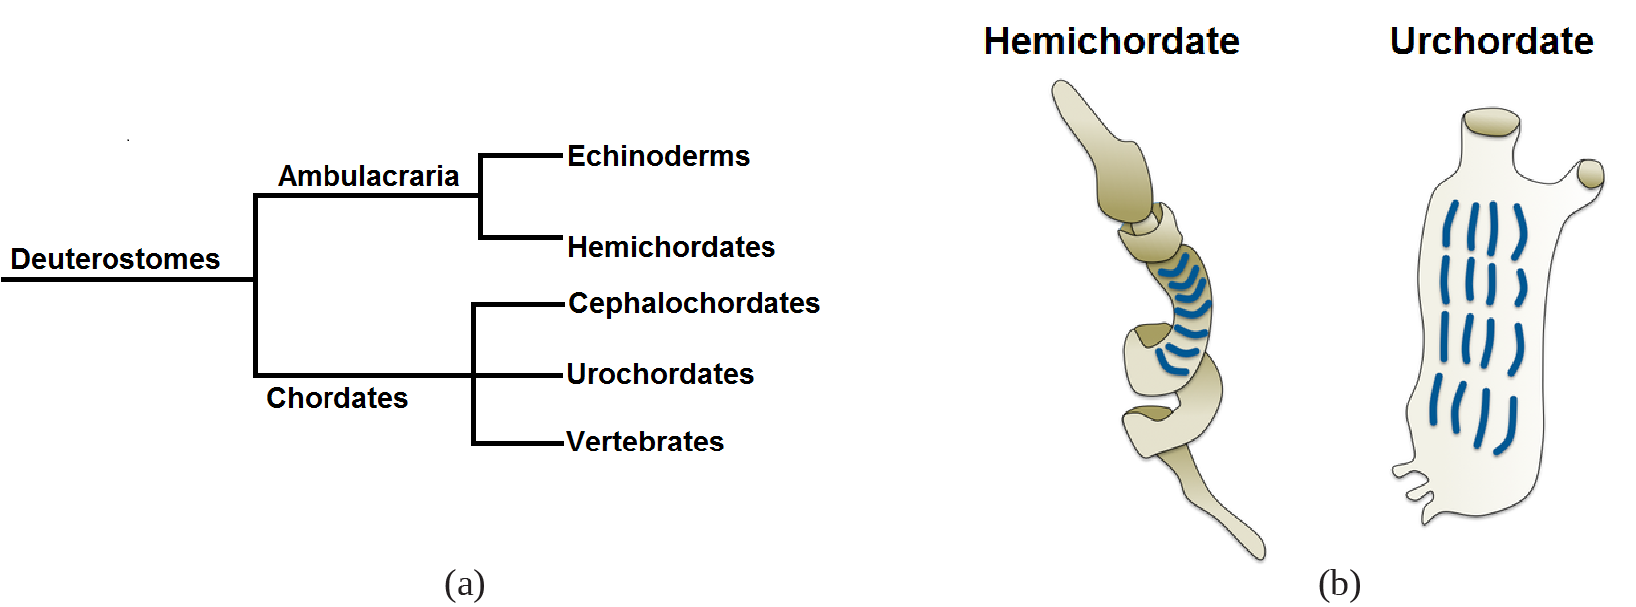 A tree diagram that starts with Deuterostomes, which then branches into two categories: Ambulacraria, and Chordates. The Ambulacraria branch, branches into another two branches: Echinoderms, and Hemichordates. The Chordates branch, branches into three additional branches: Cephalochordates, Urochordates, Vertebrates